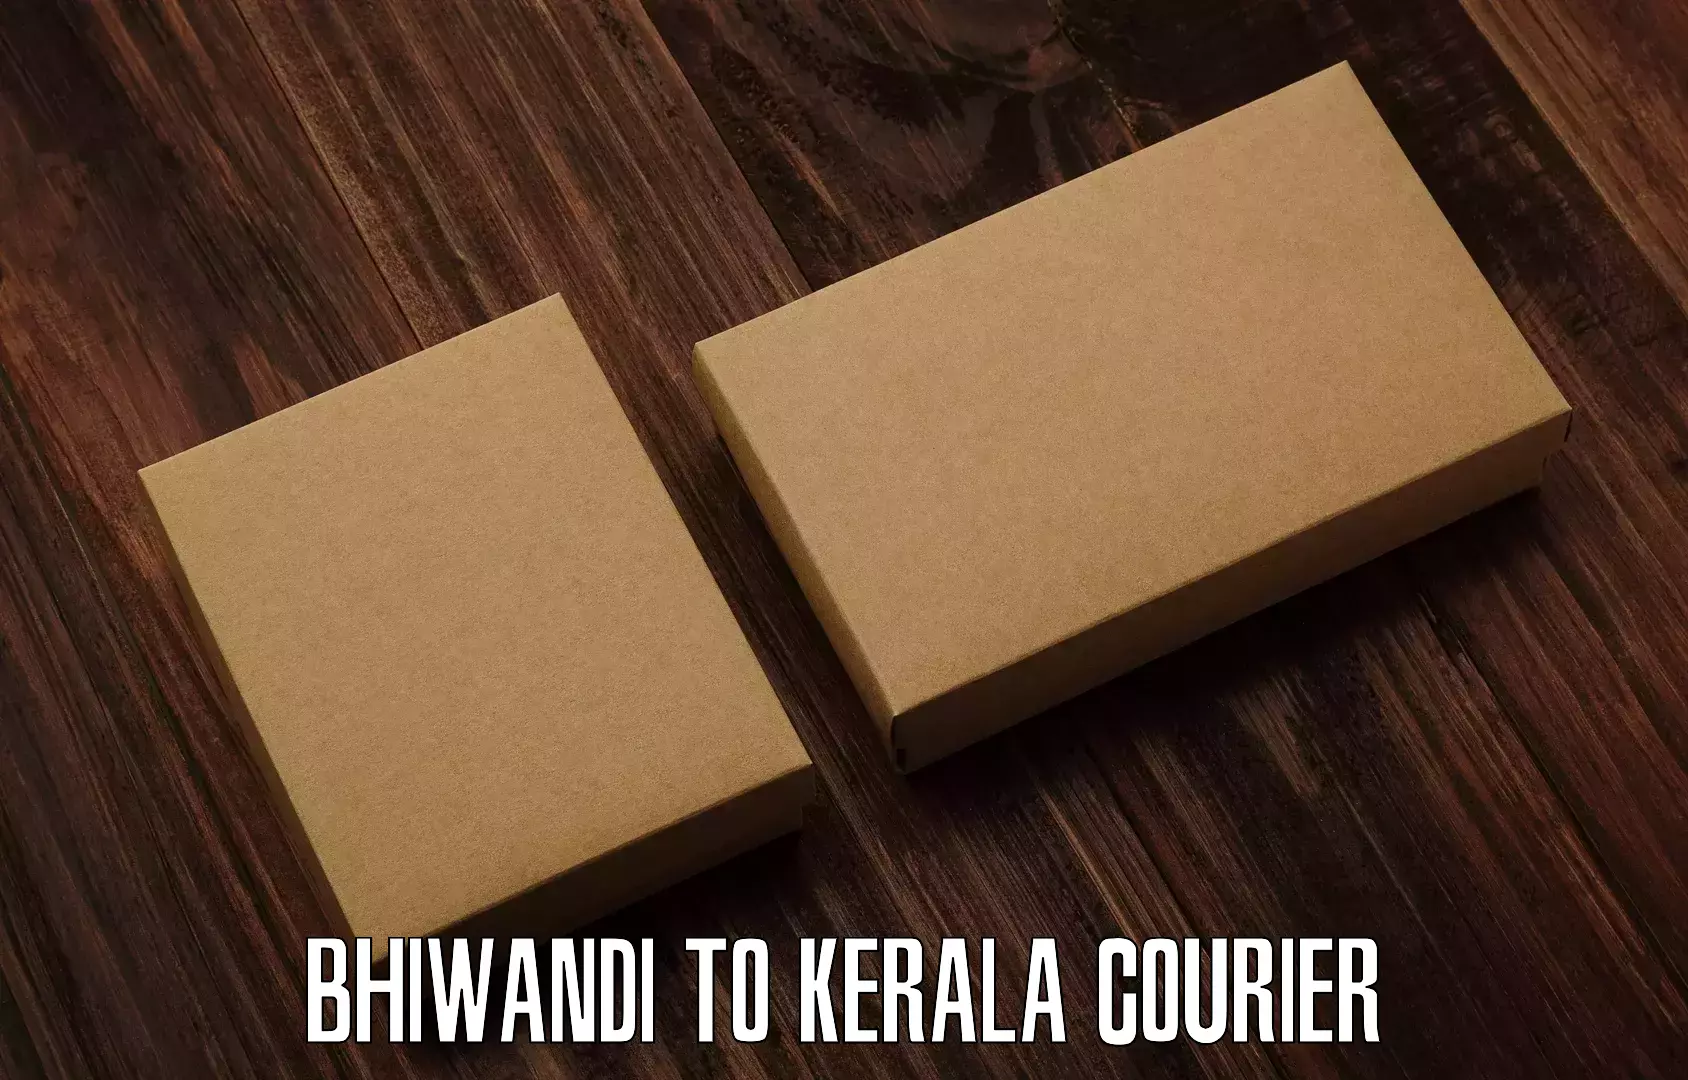 User-friendly delivery service Bhiwandi to Akaloor